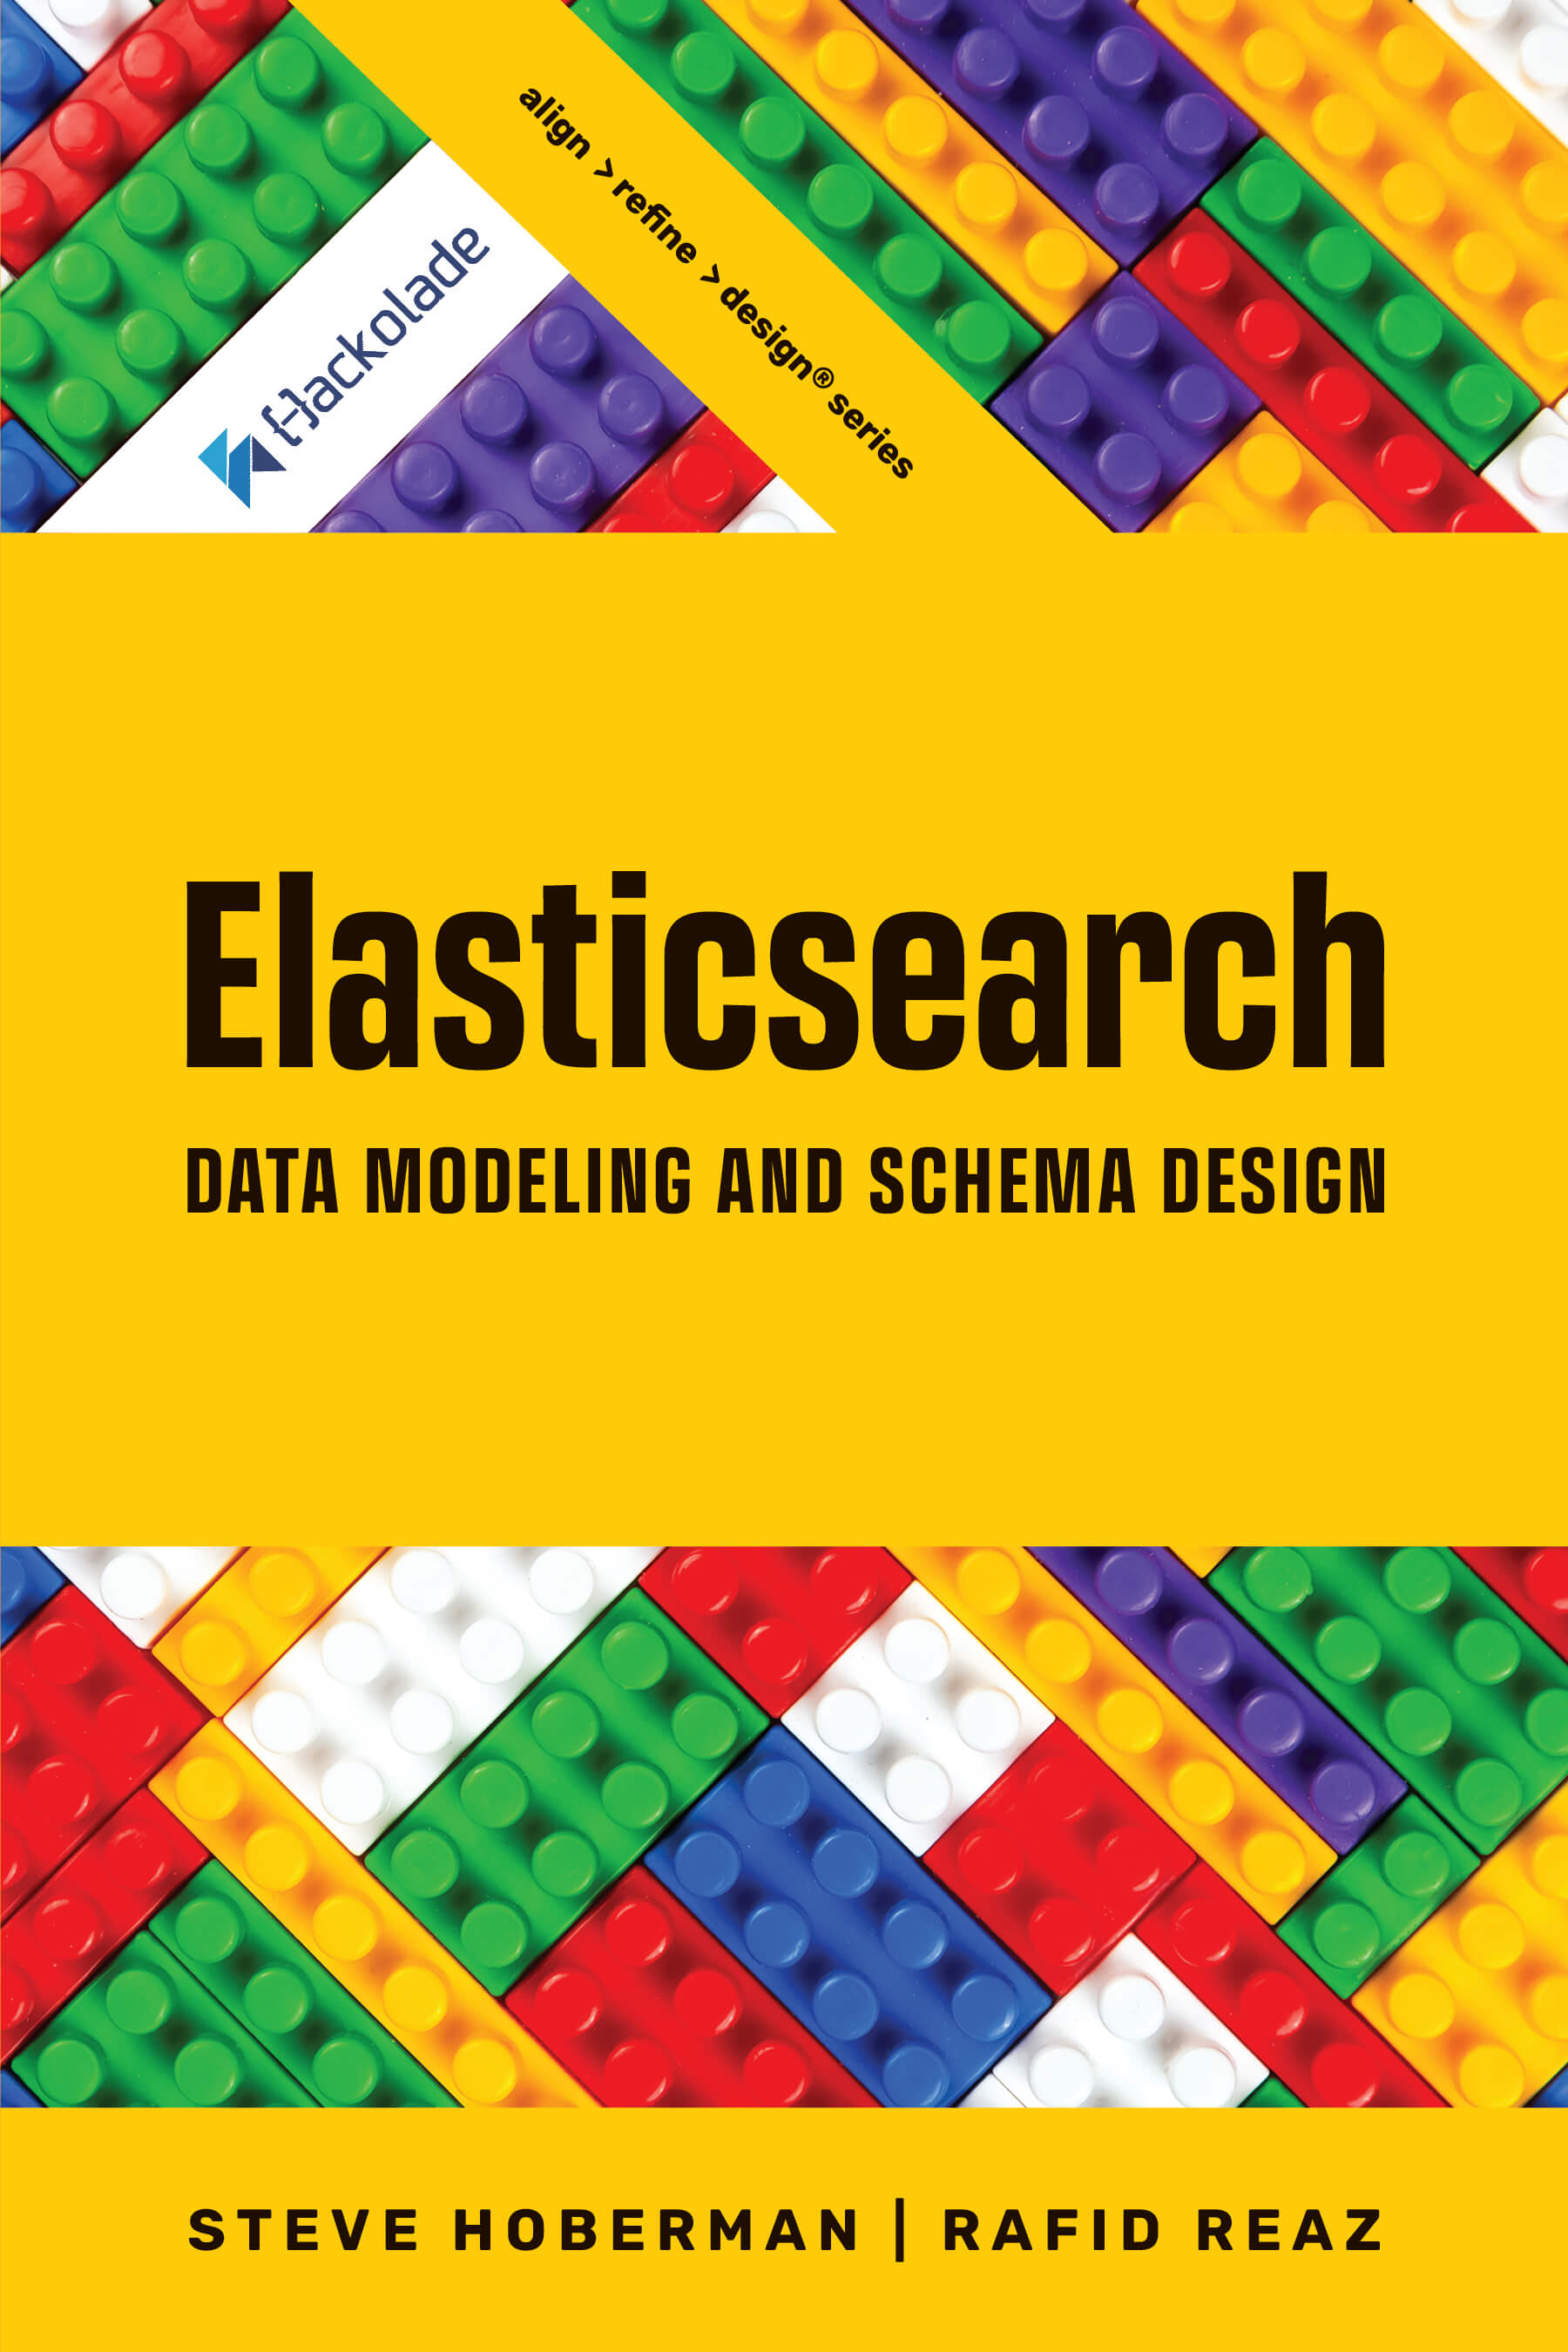 Data Modeling and Schema Design for Elasticsearch